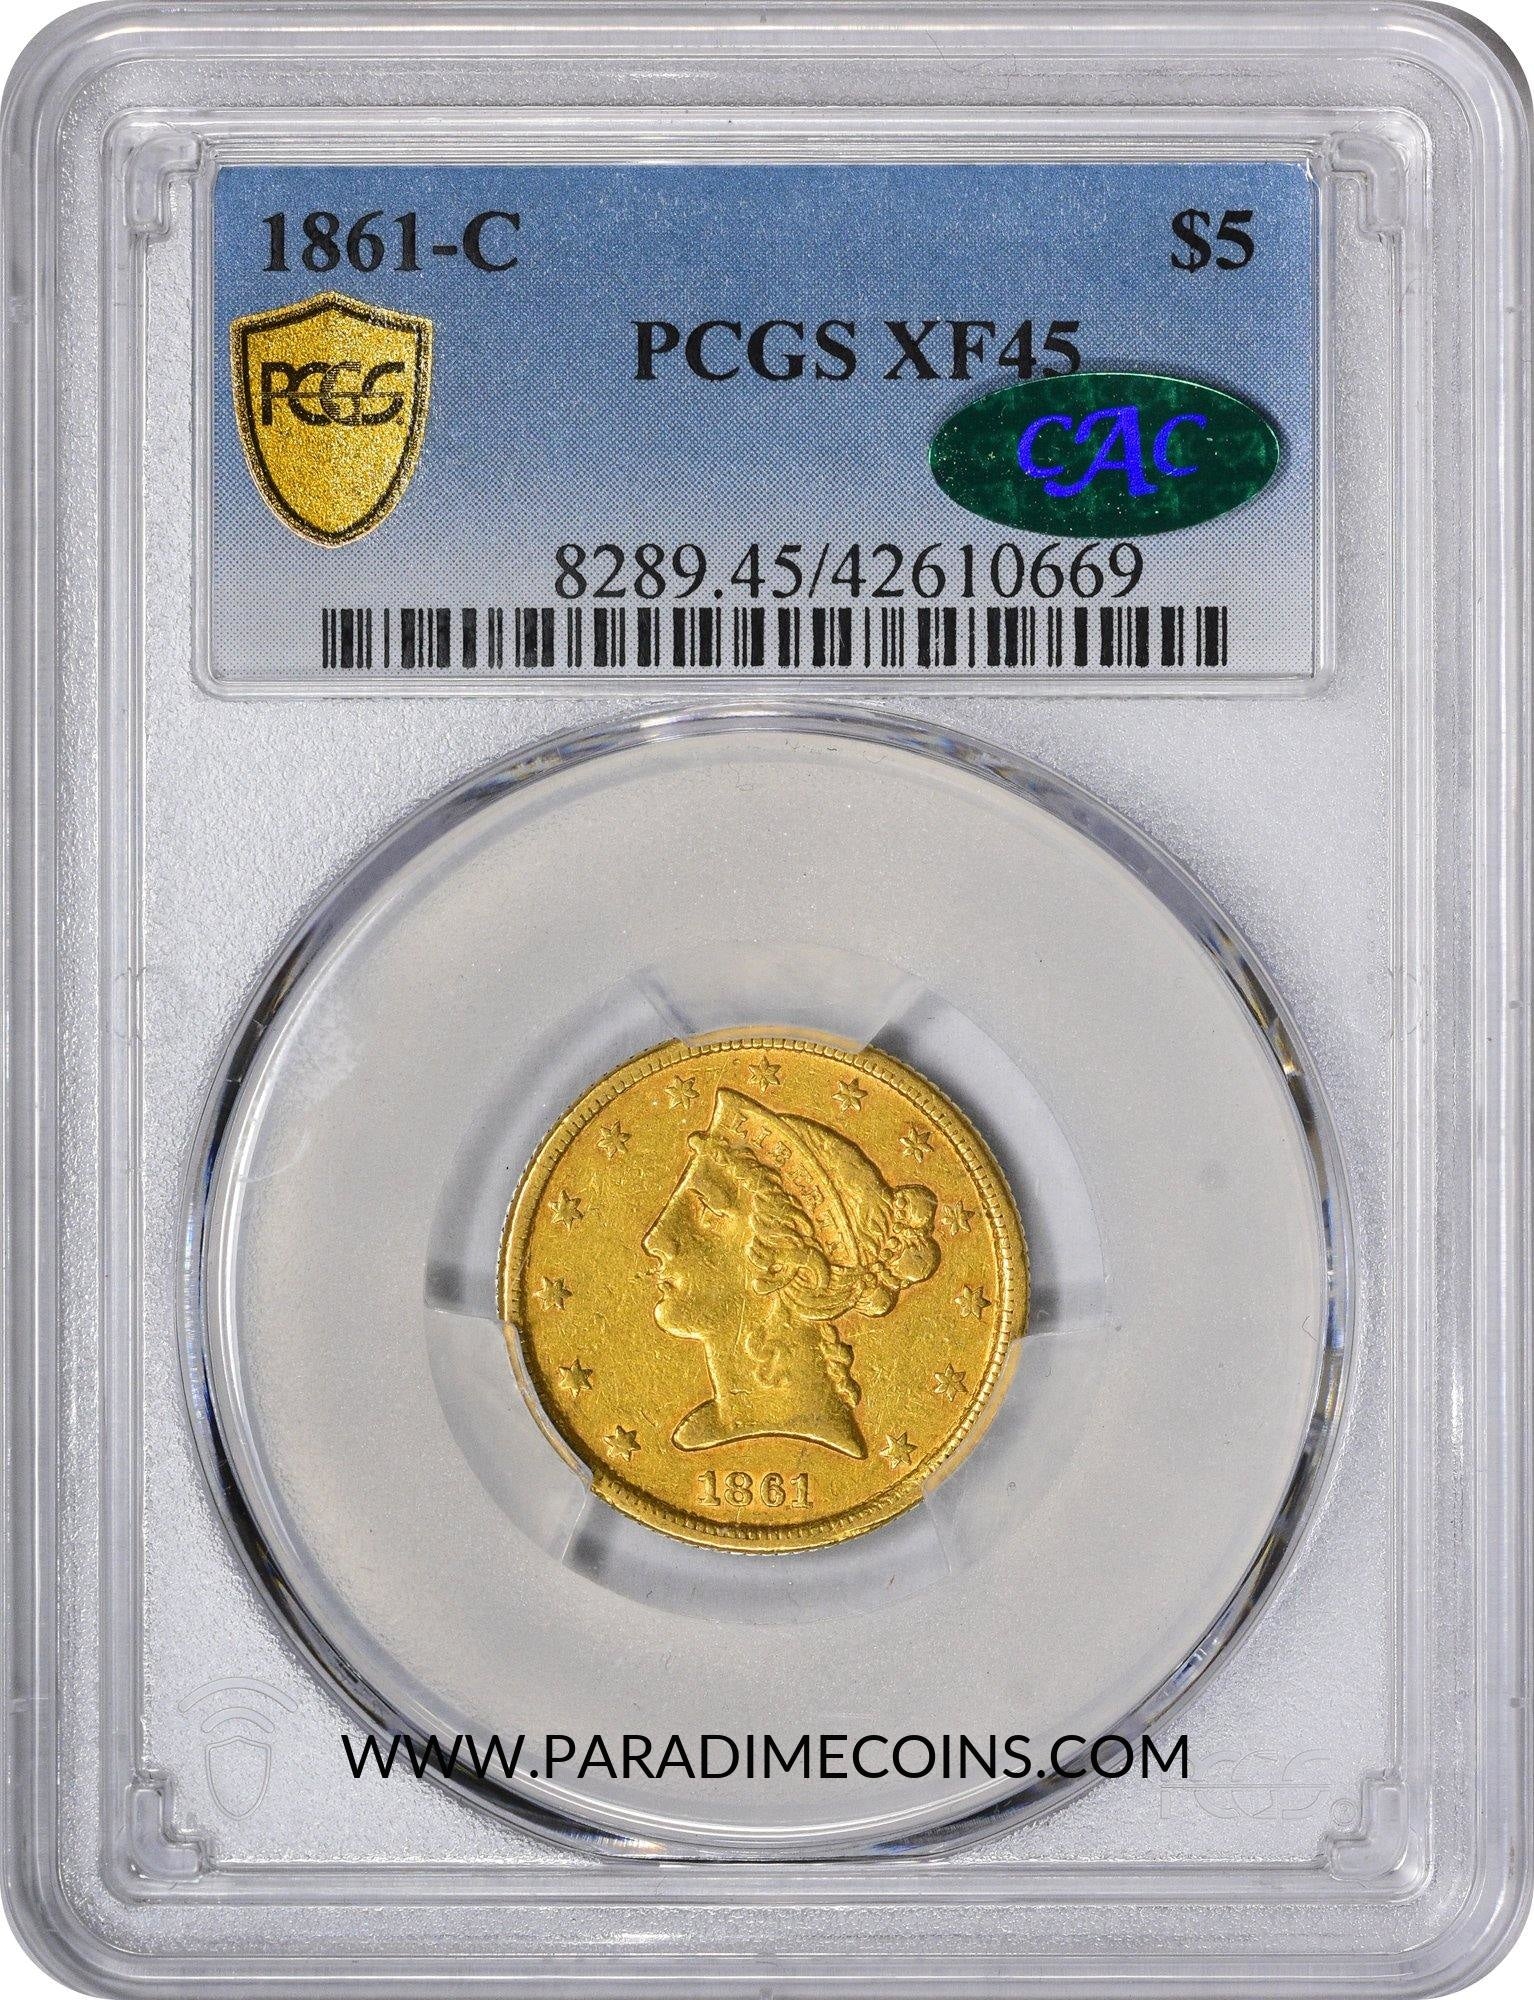 1861-C $5 XF45 PCGS CAC - Paradime Coins | PCGS NGC CACG CAC Rare US Numismatic Coins For Sale